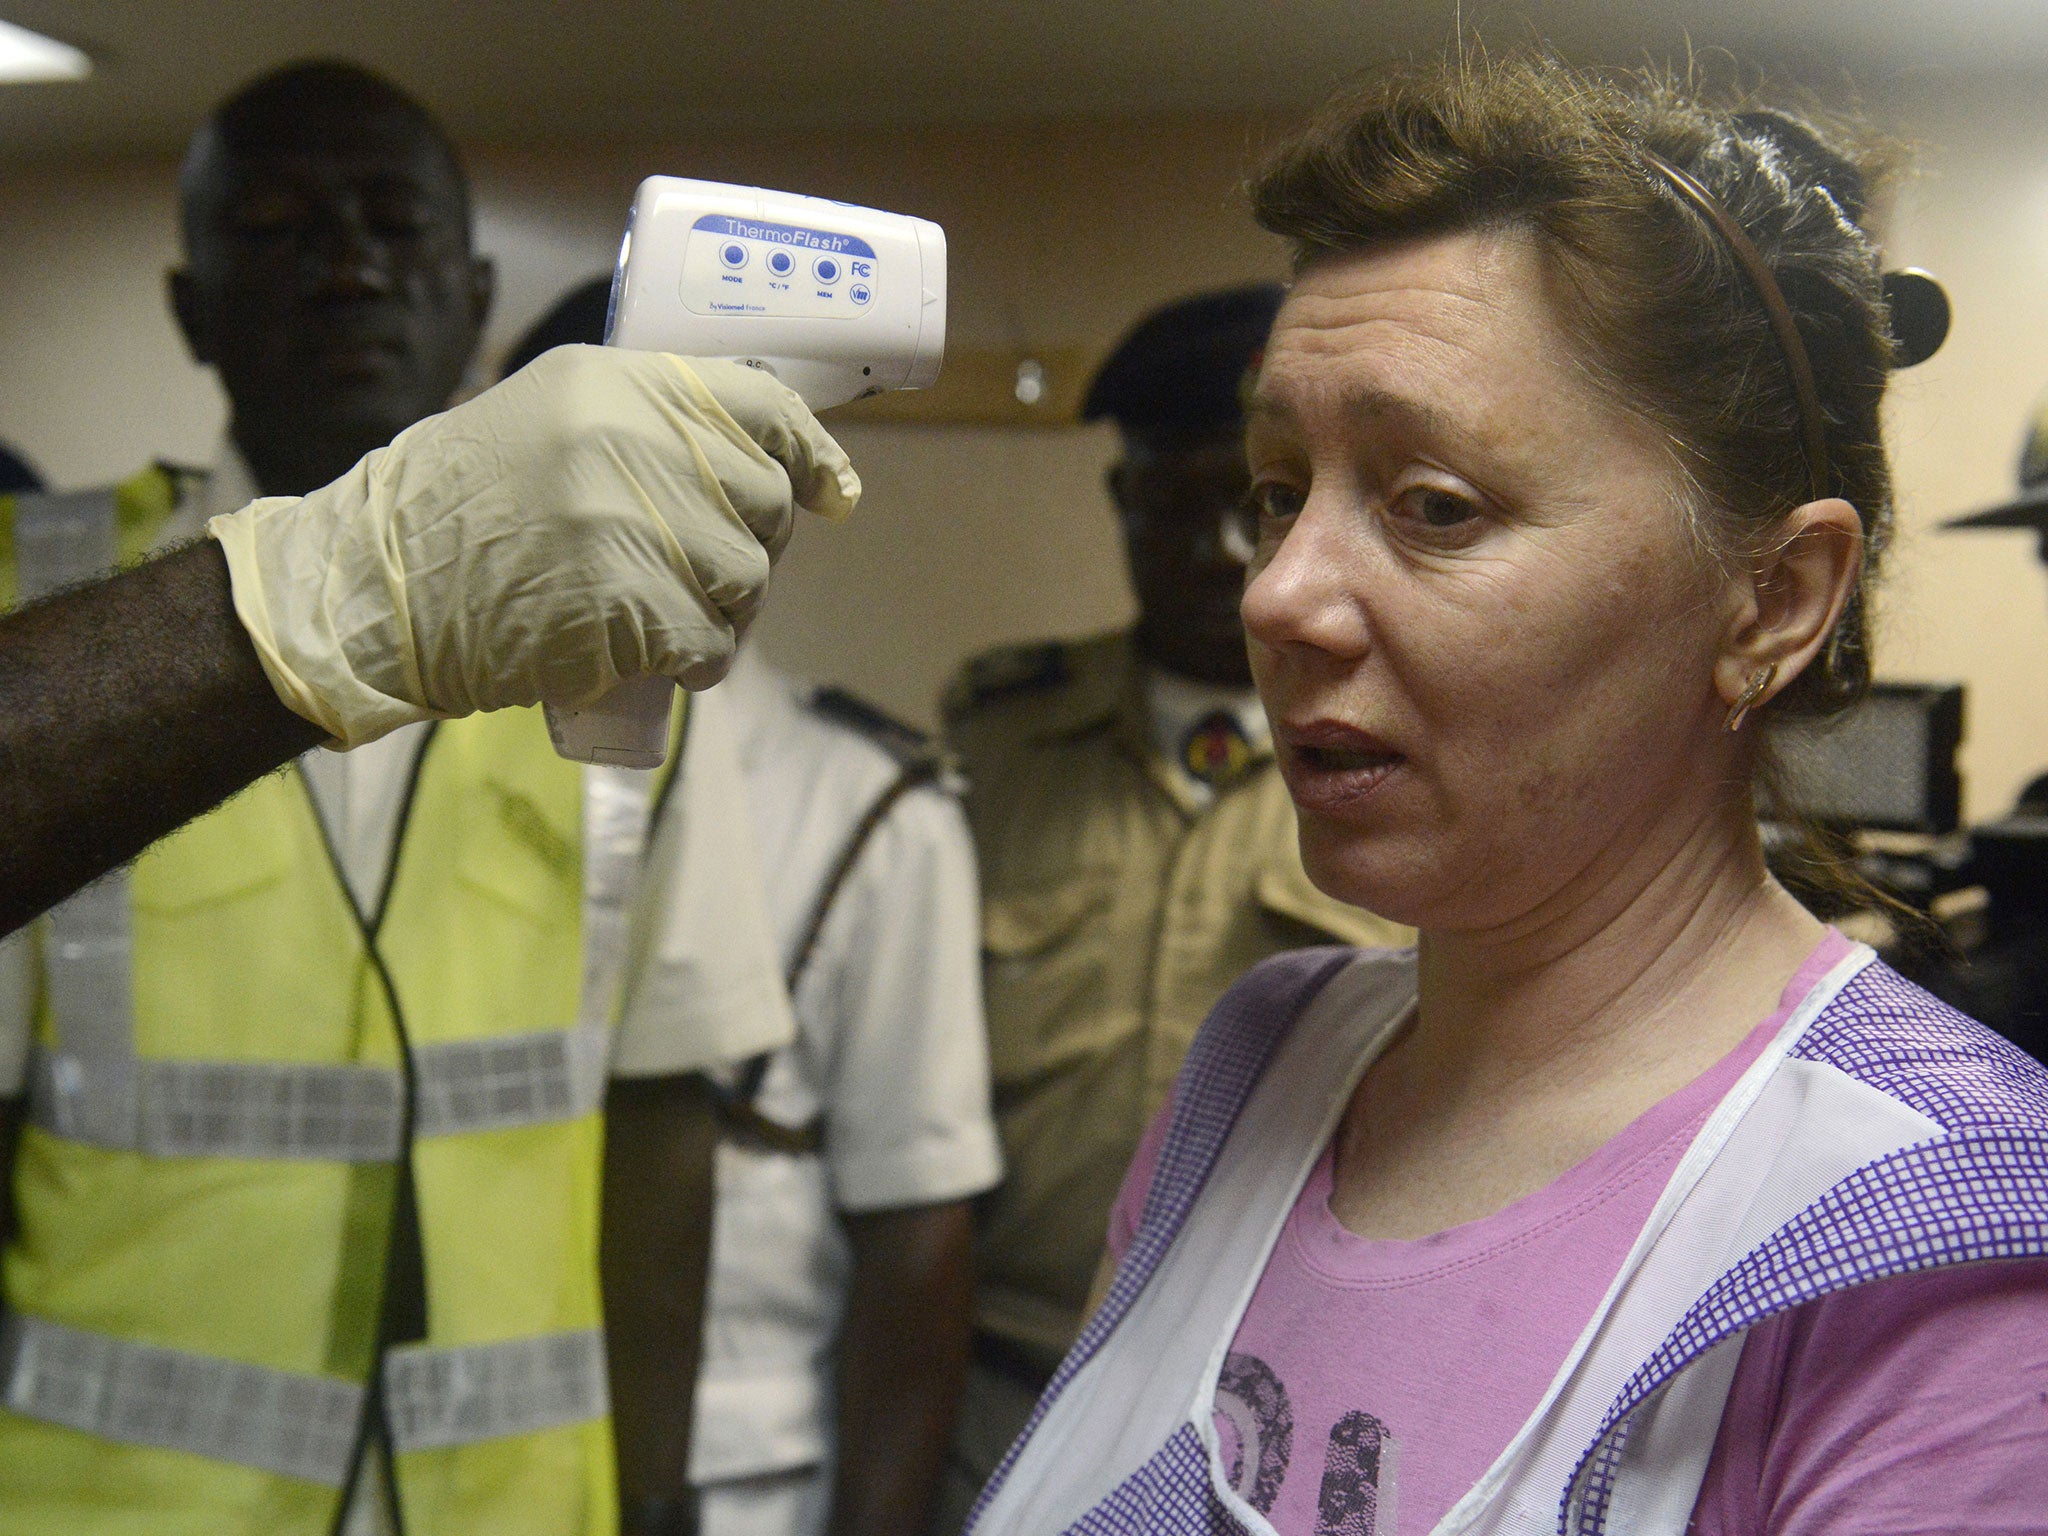 29 September 29 2014: A health official takes the body temperature of an Ukrainian worker on the MV Pintail cargo ship, as they check for signs of the Ebola virus at the Apapa Sea Port, in Lagos